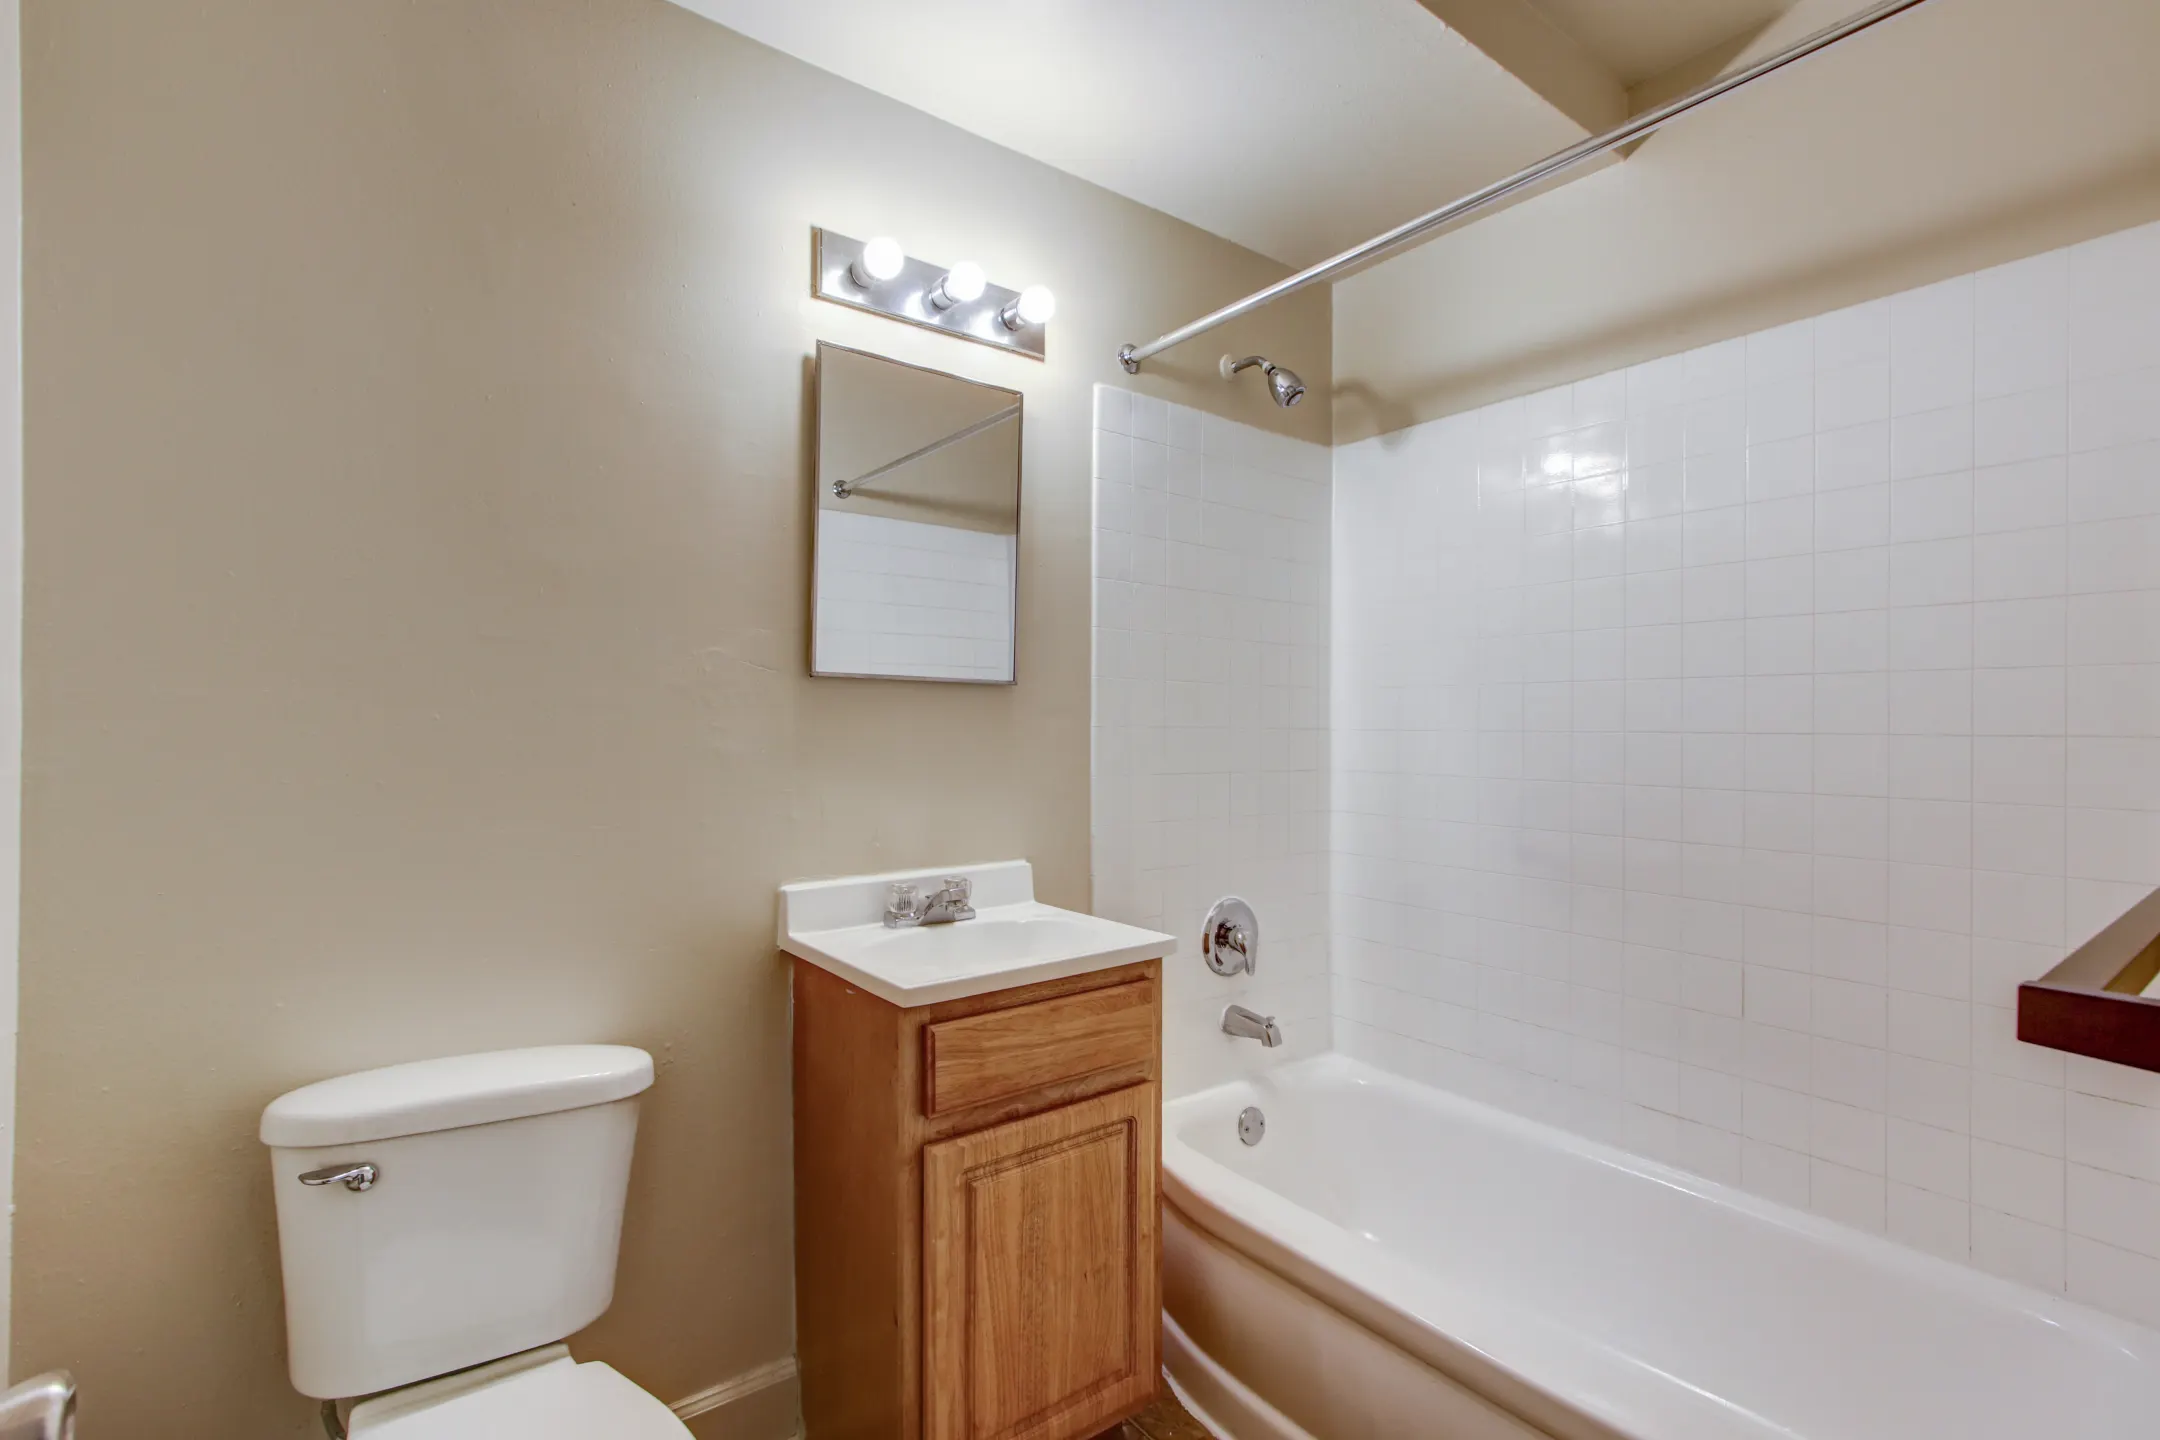 Bathroom - Avenue Apartments - District Heights, MD